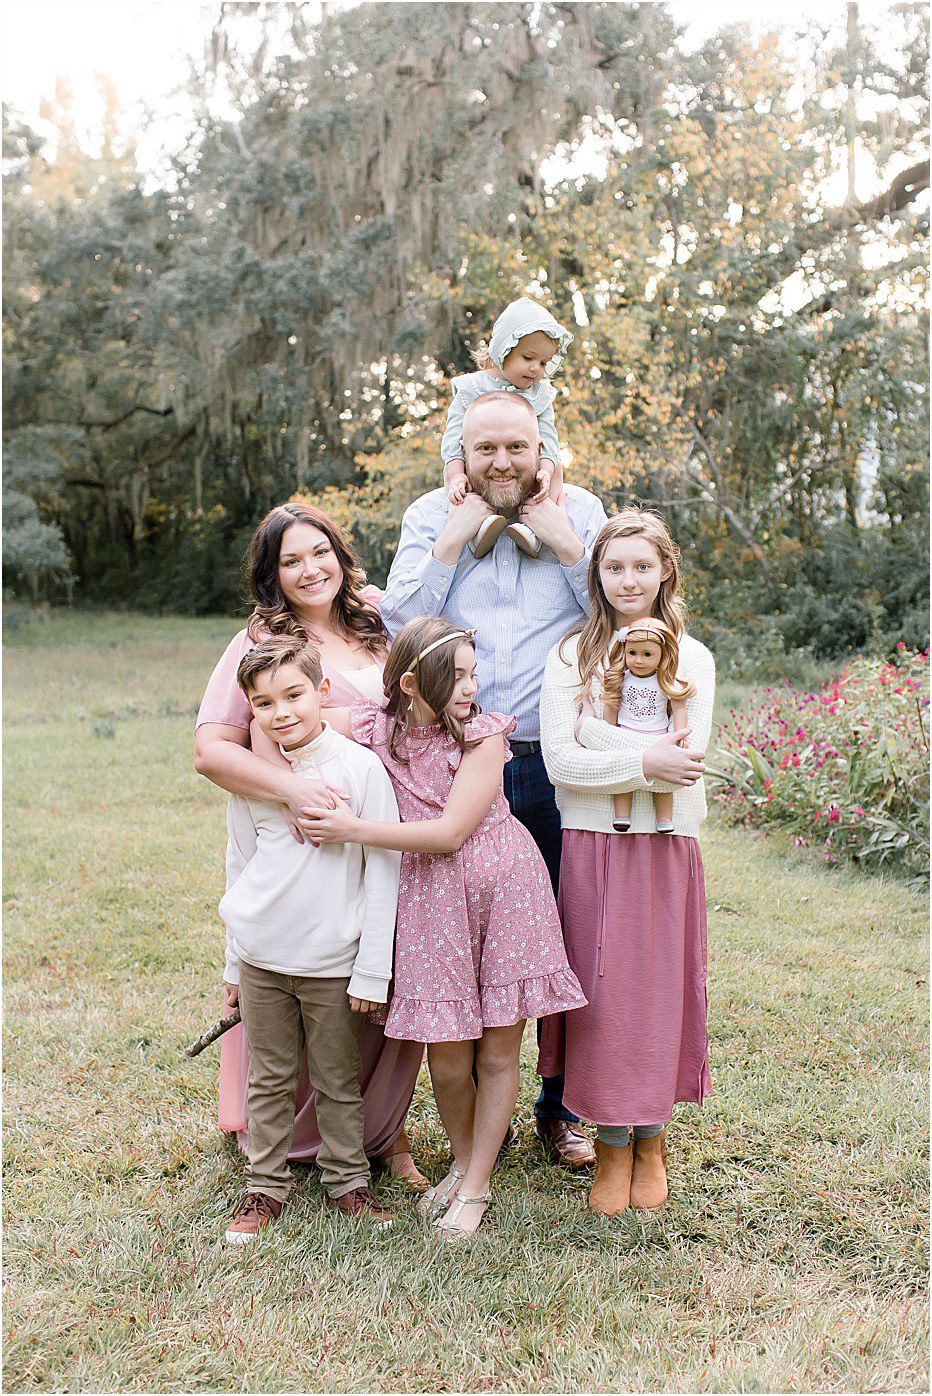 Tallahassee photographer Sarah and her family